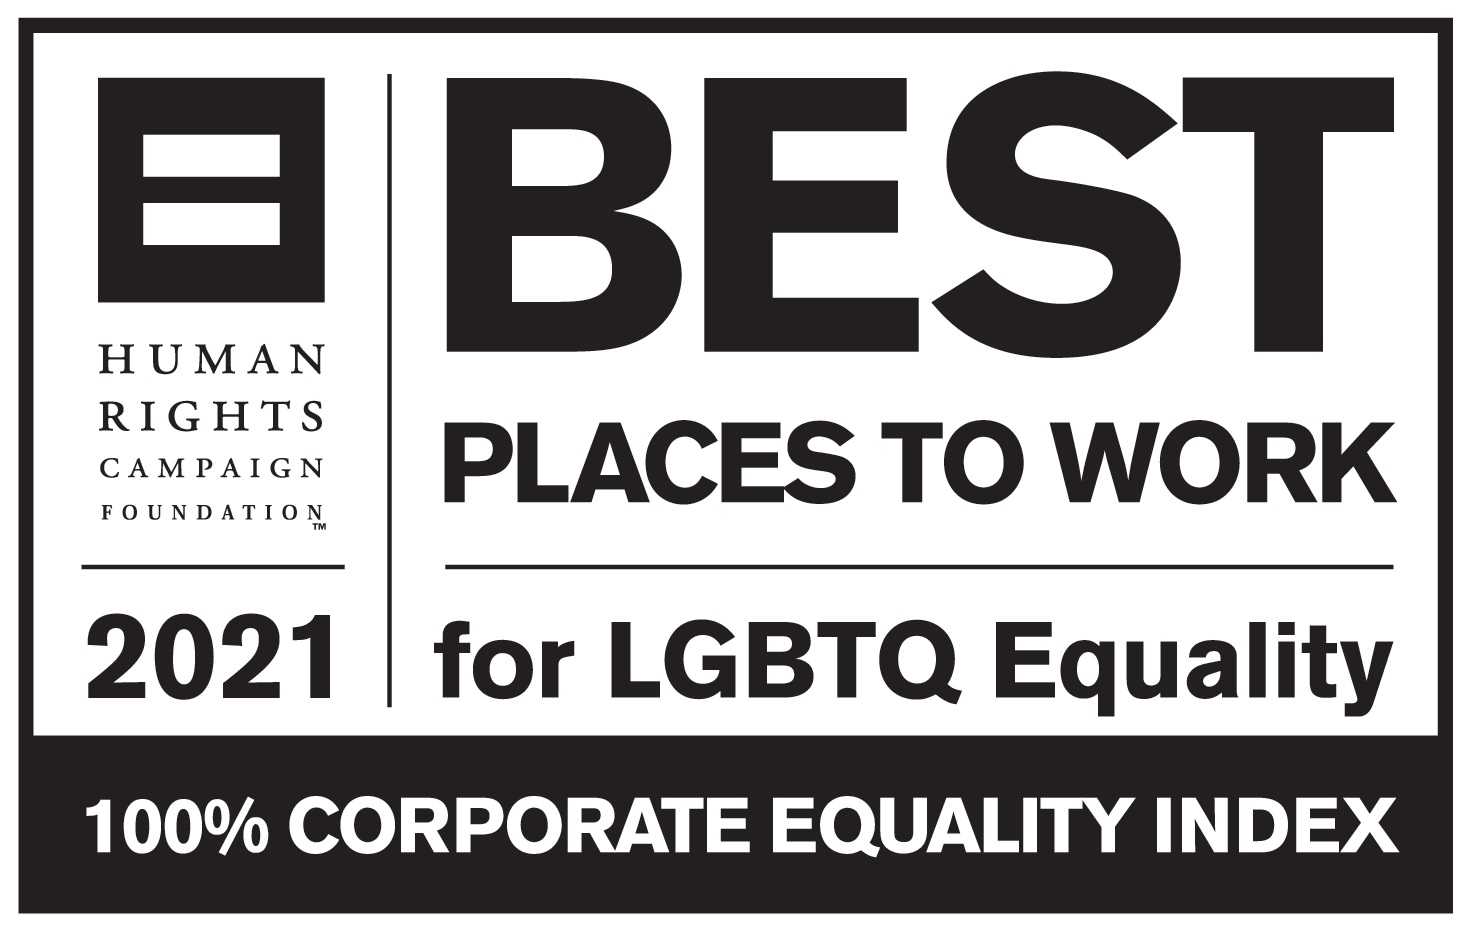 Best places to work for LGBT equality